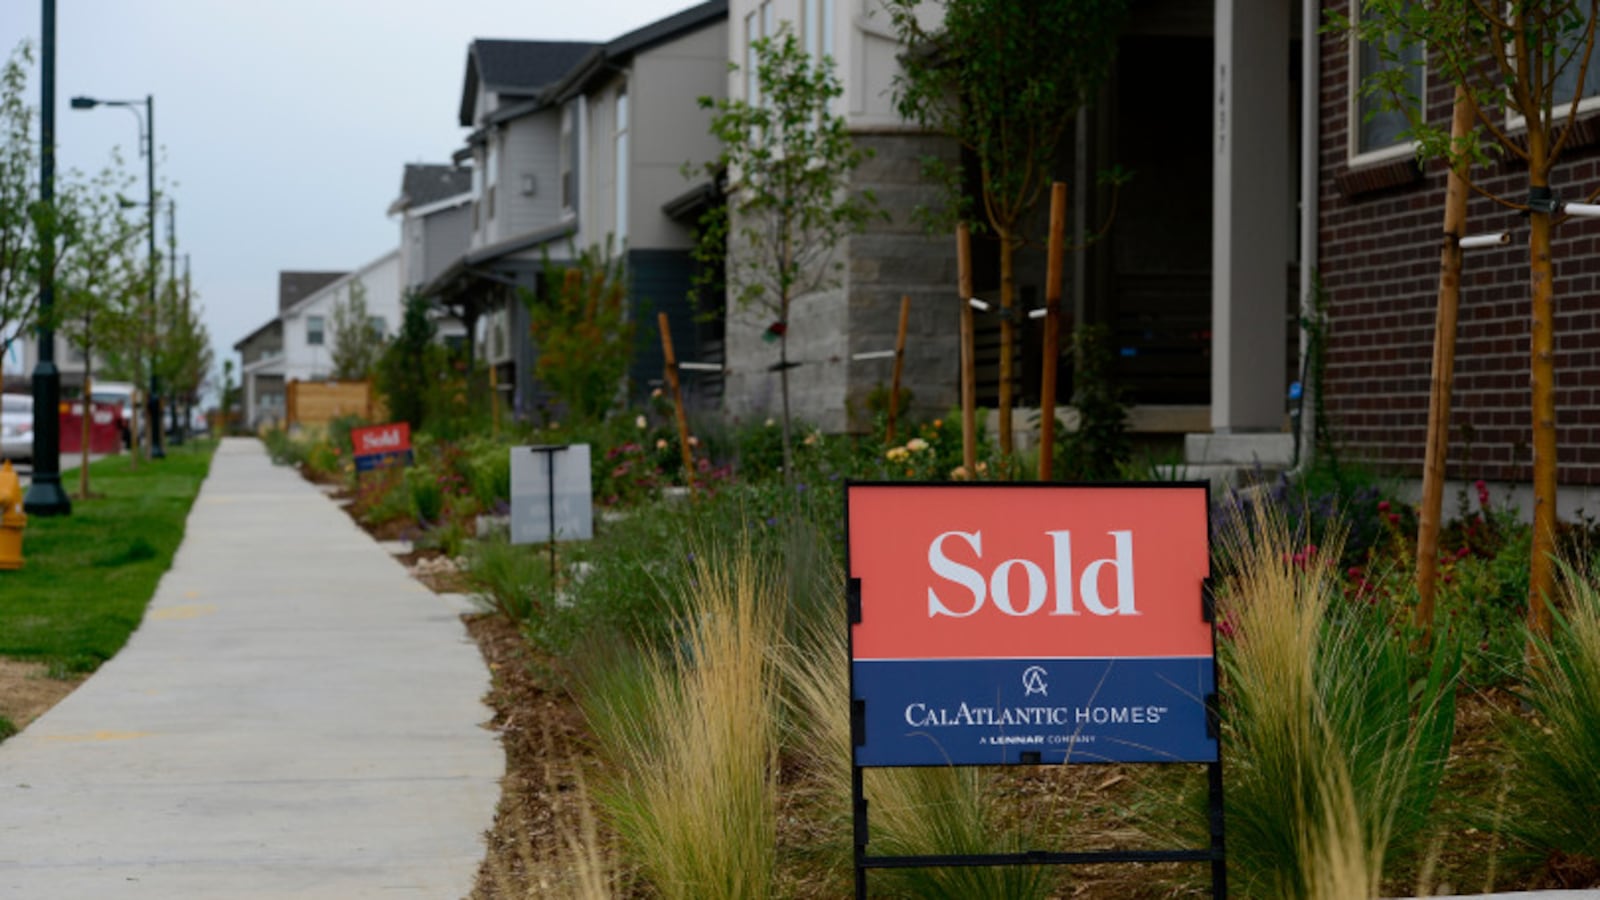 Sold signs can be seen on many of the homes in Stapleton on August 1, 2018, in Denver, Colorado.